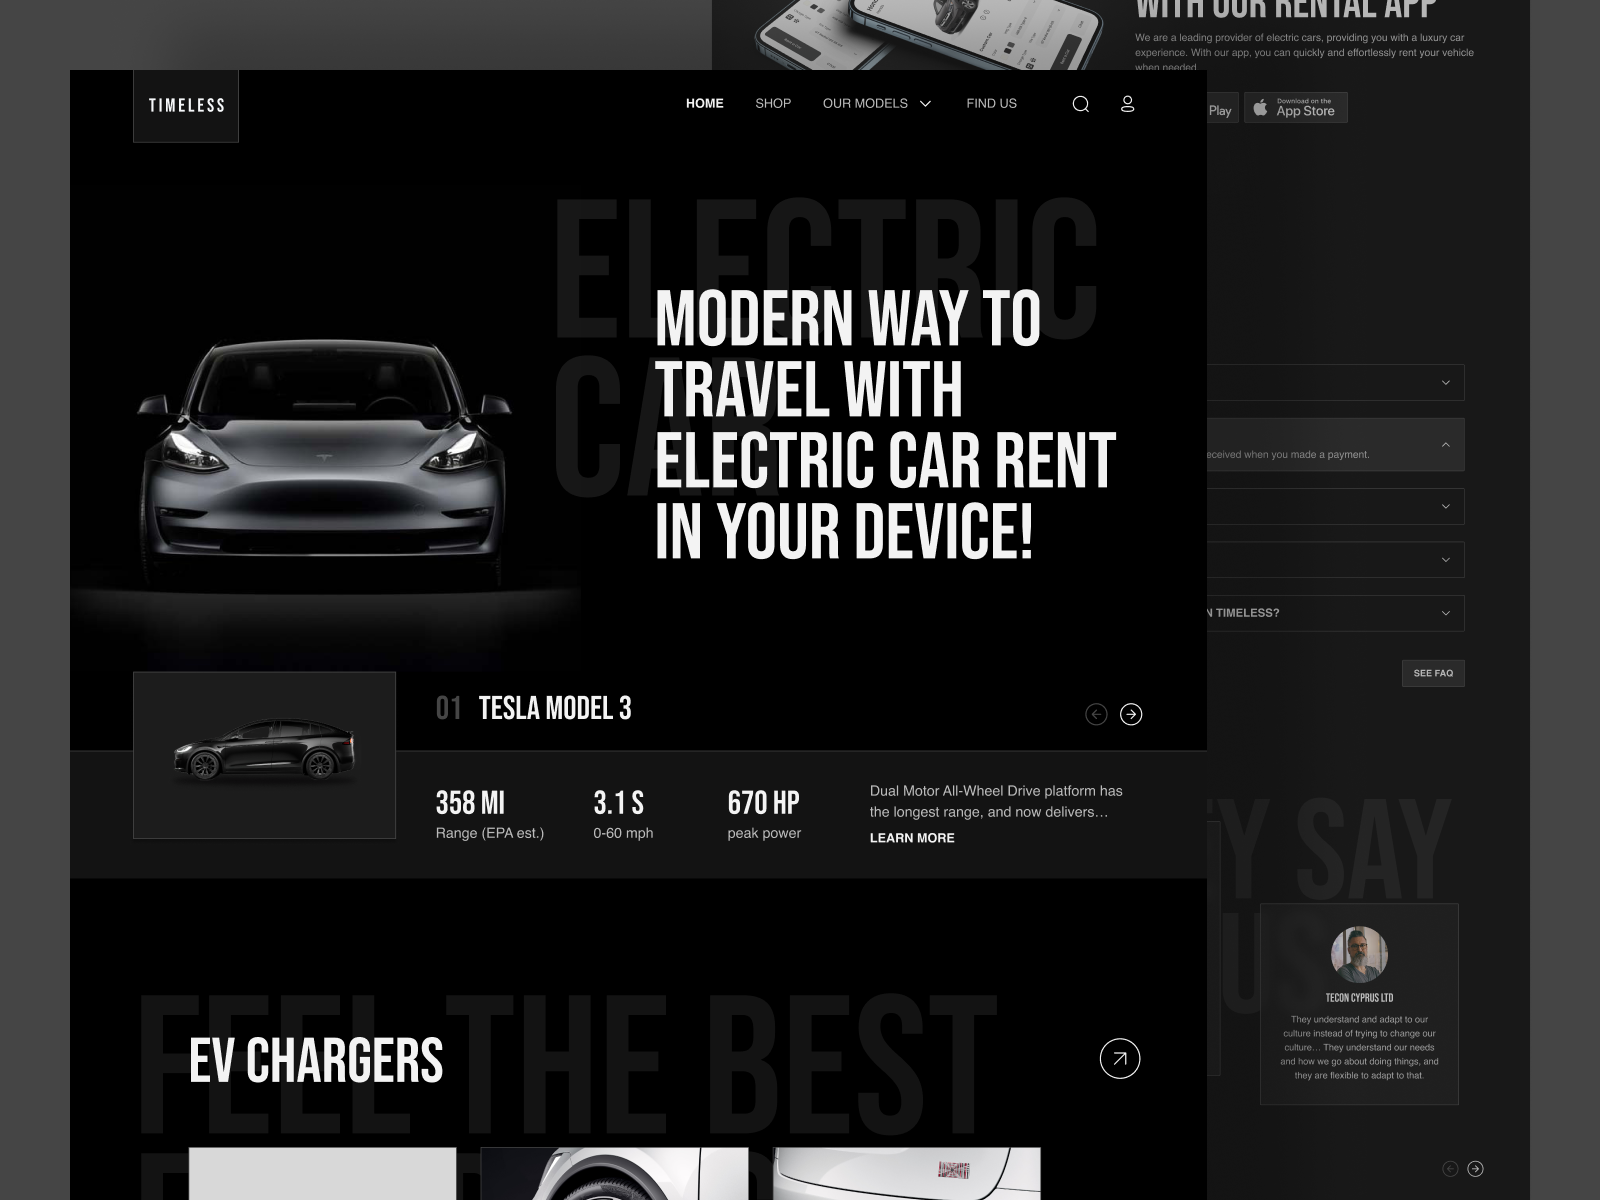 Electric Car Rent Website by R Ghozia U for Pixelz on Dribbble